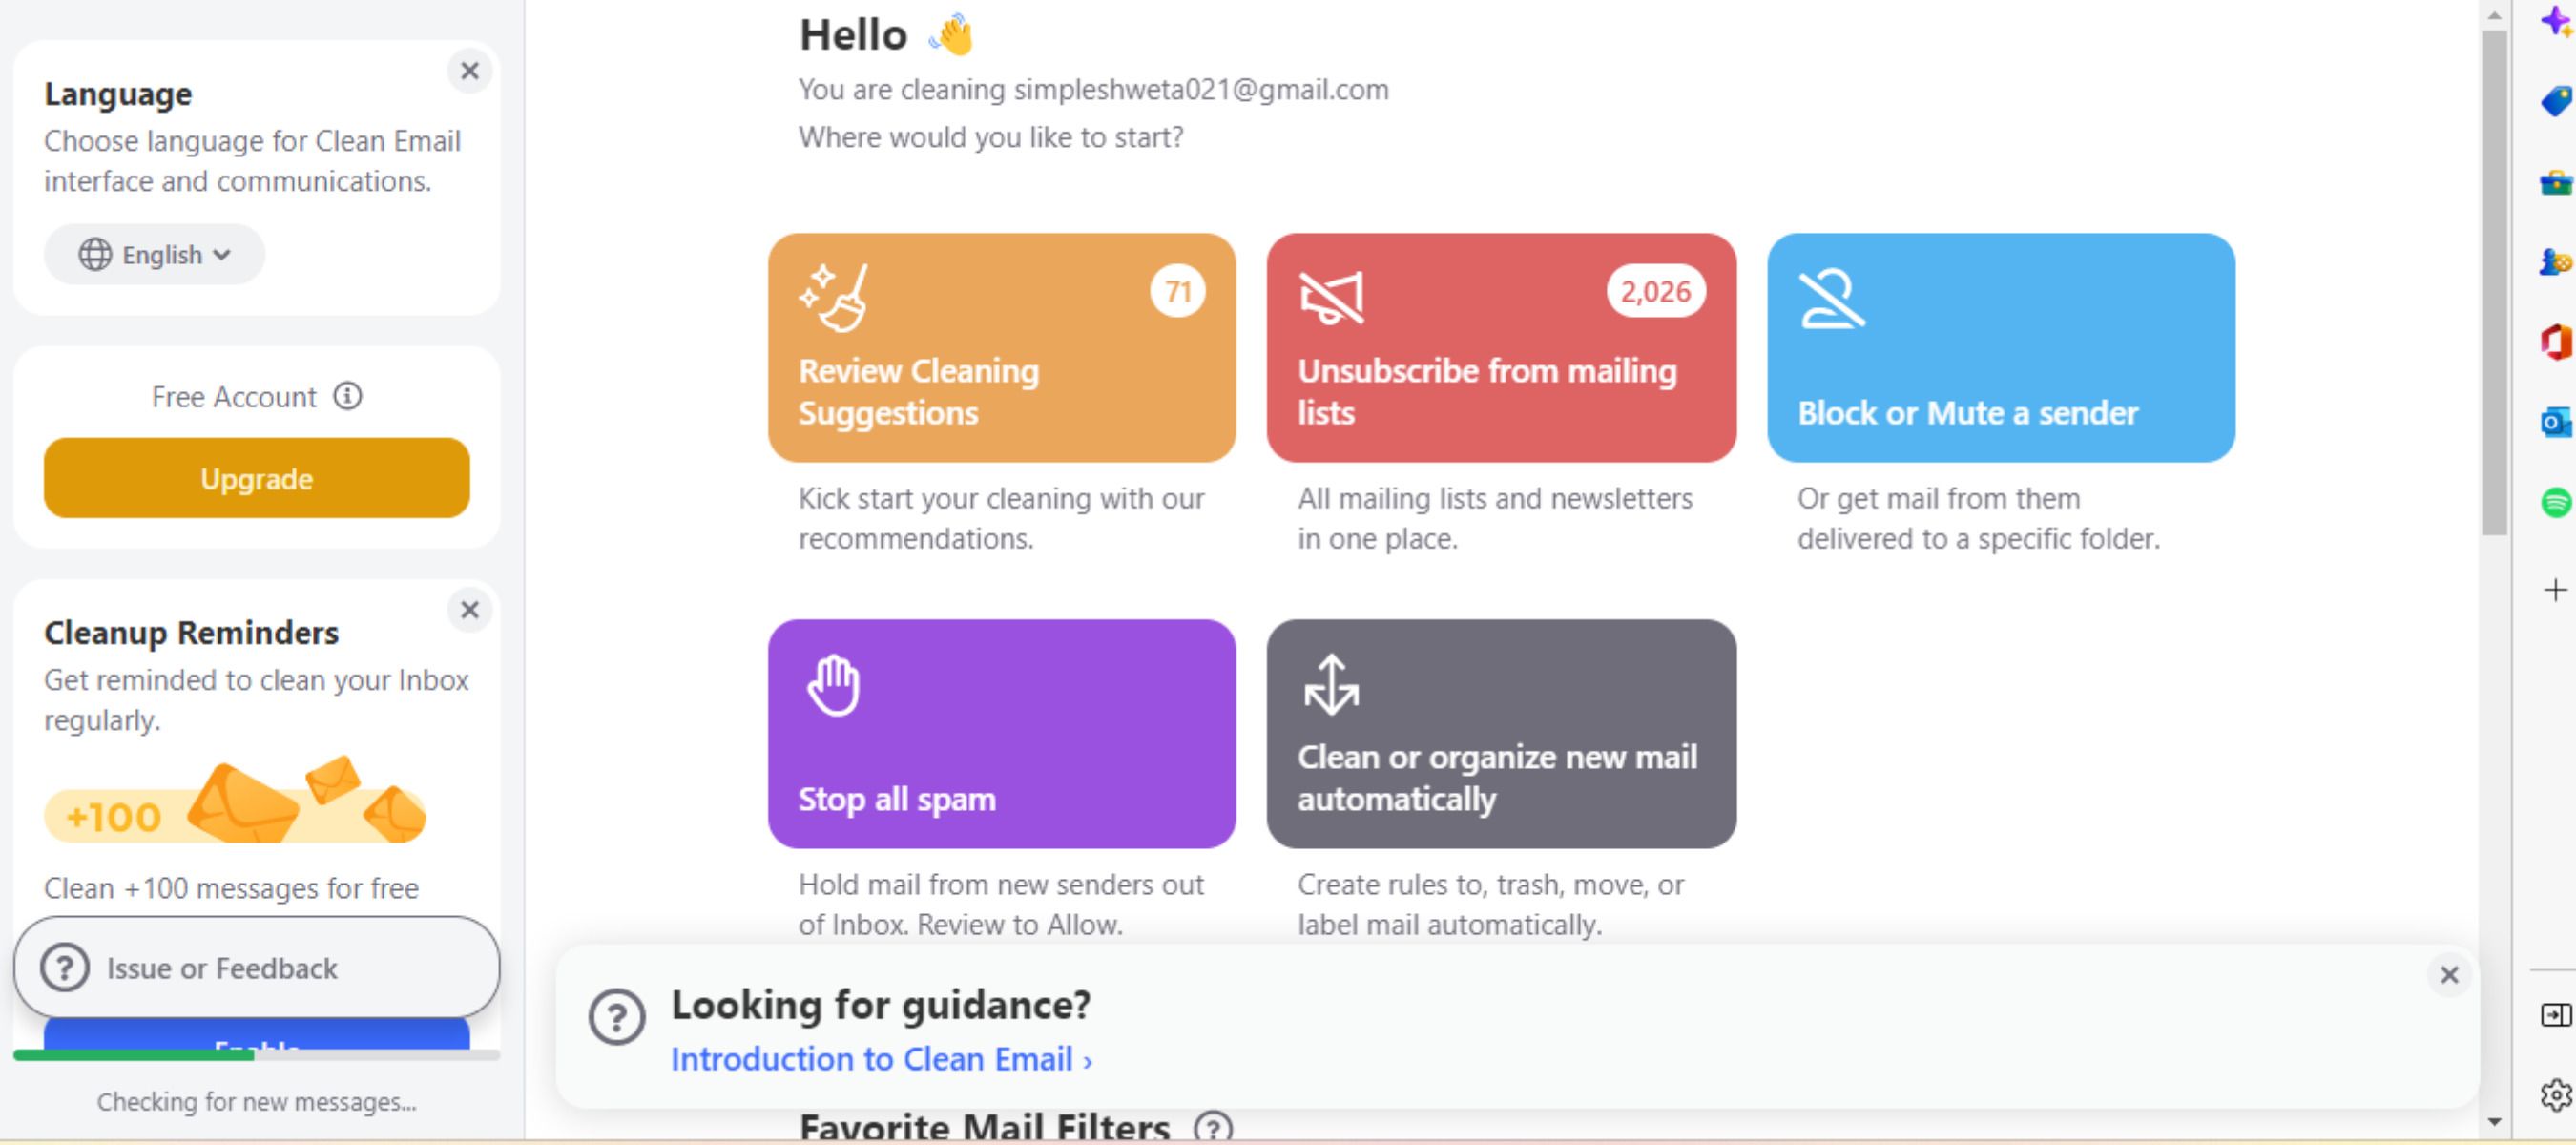 Features and dashboard in the Clean Email app